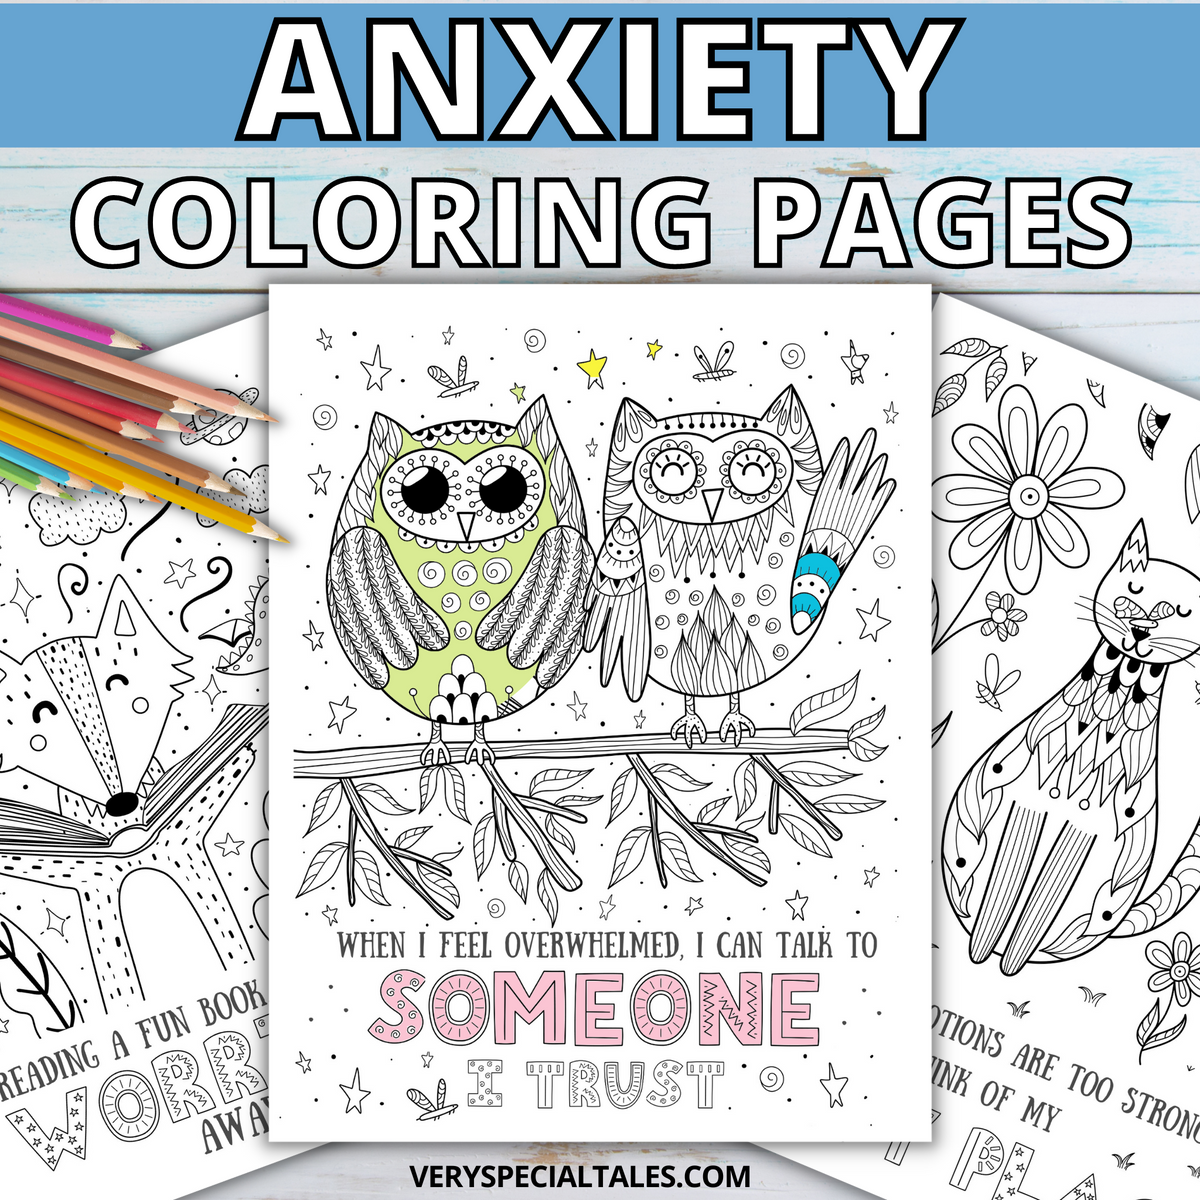 Black and white colouring pages depicting a fox, two owls, and a cat with positive affirmations underneath.